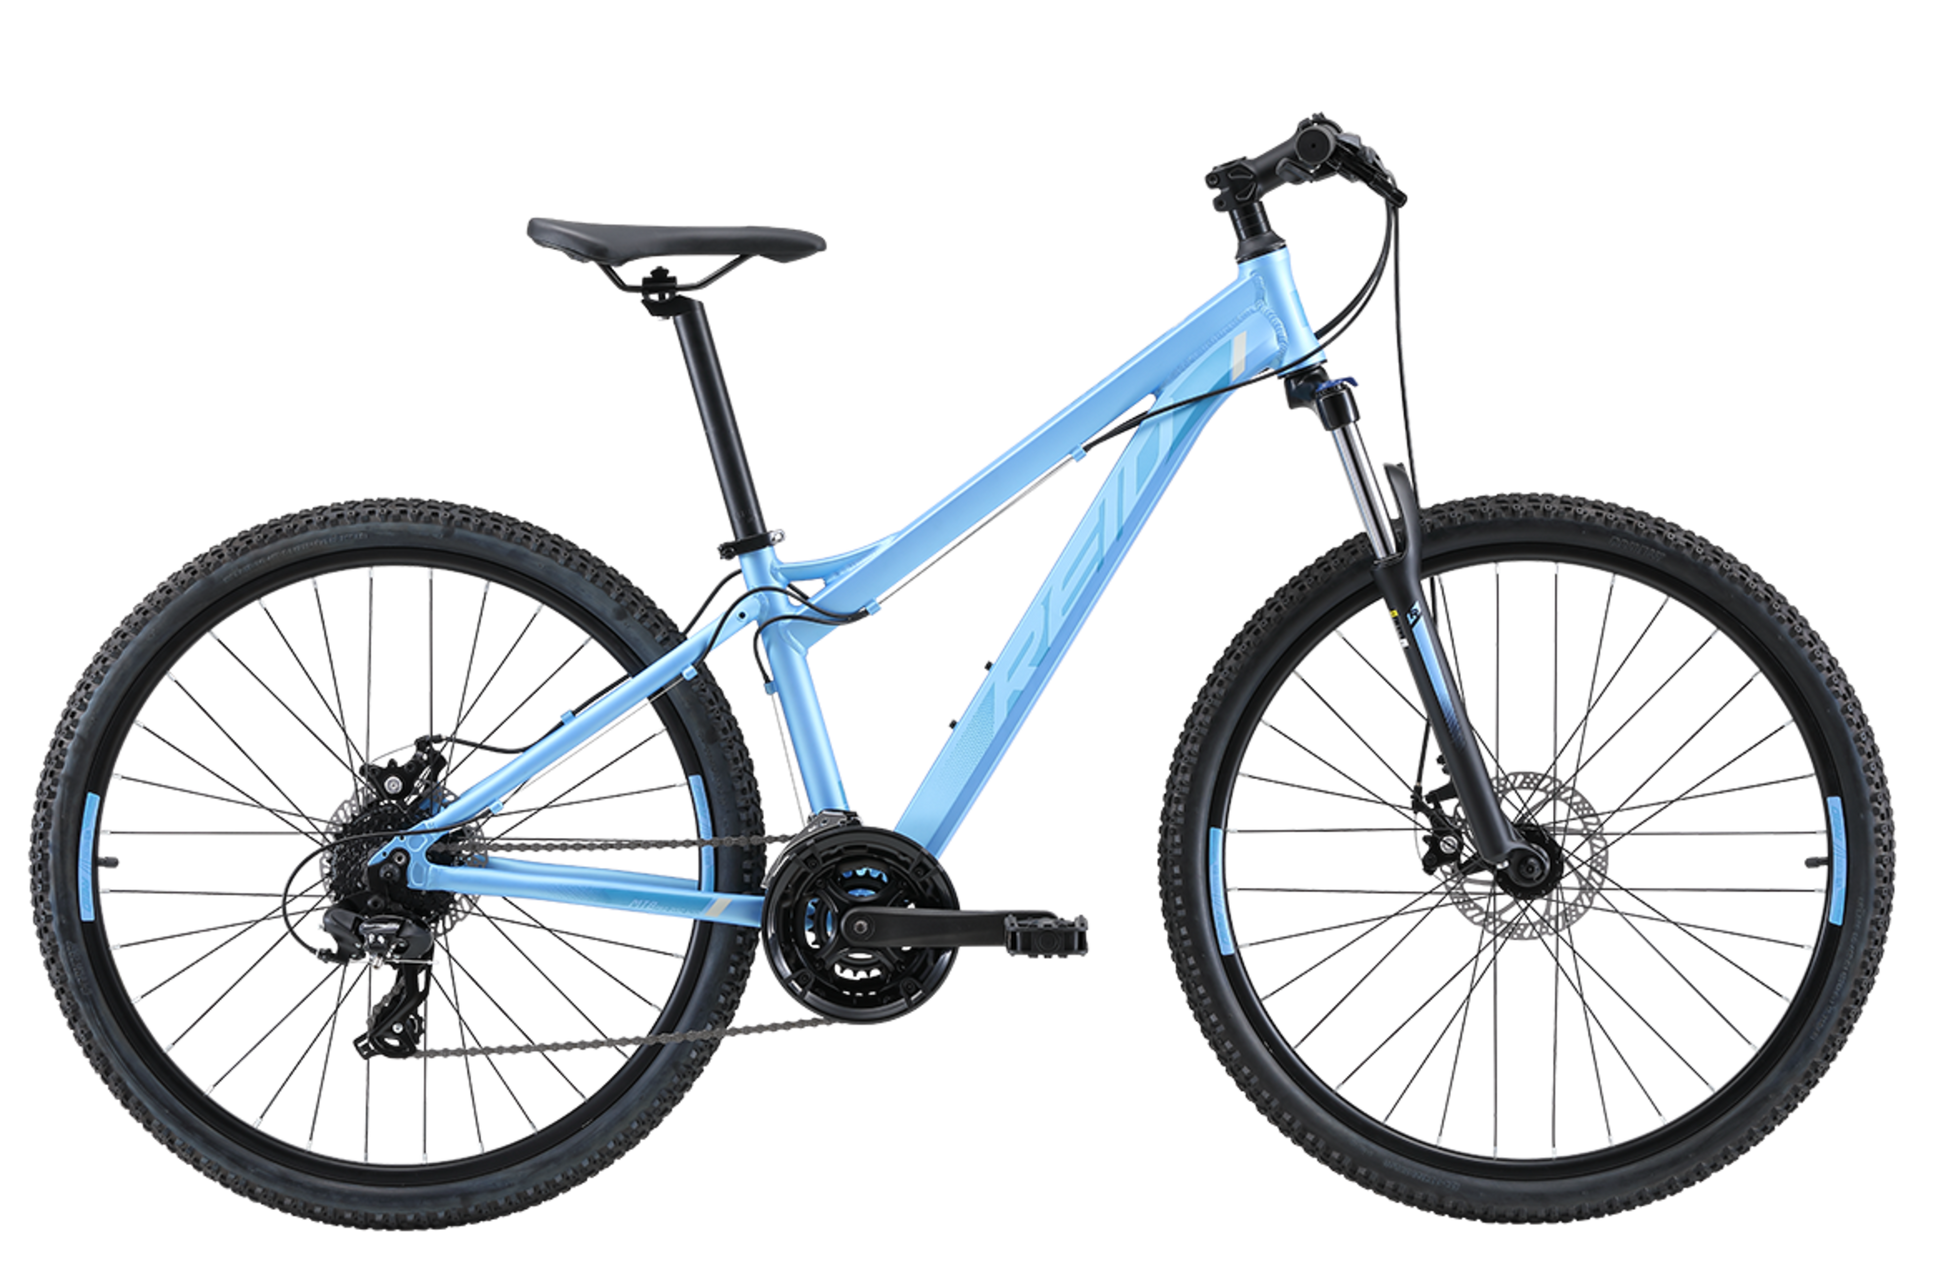 MTB Pro 27.5" Disc WSD Mountain Bike in light blue with Shimano 8-speed gearing from Reid Cycles Australia